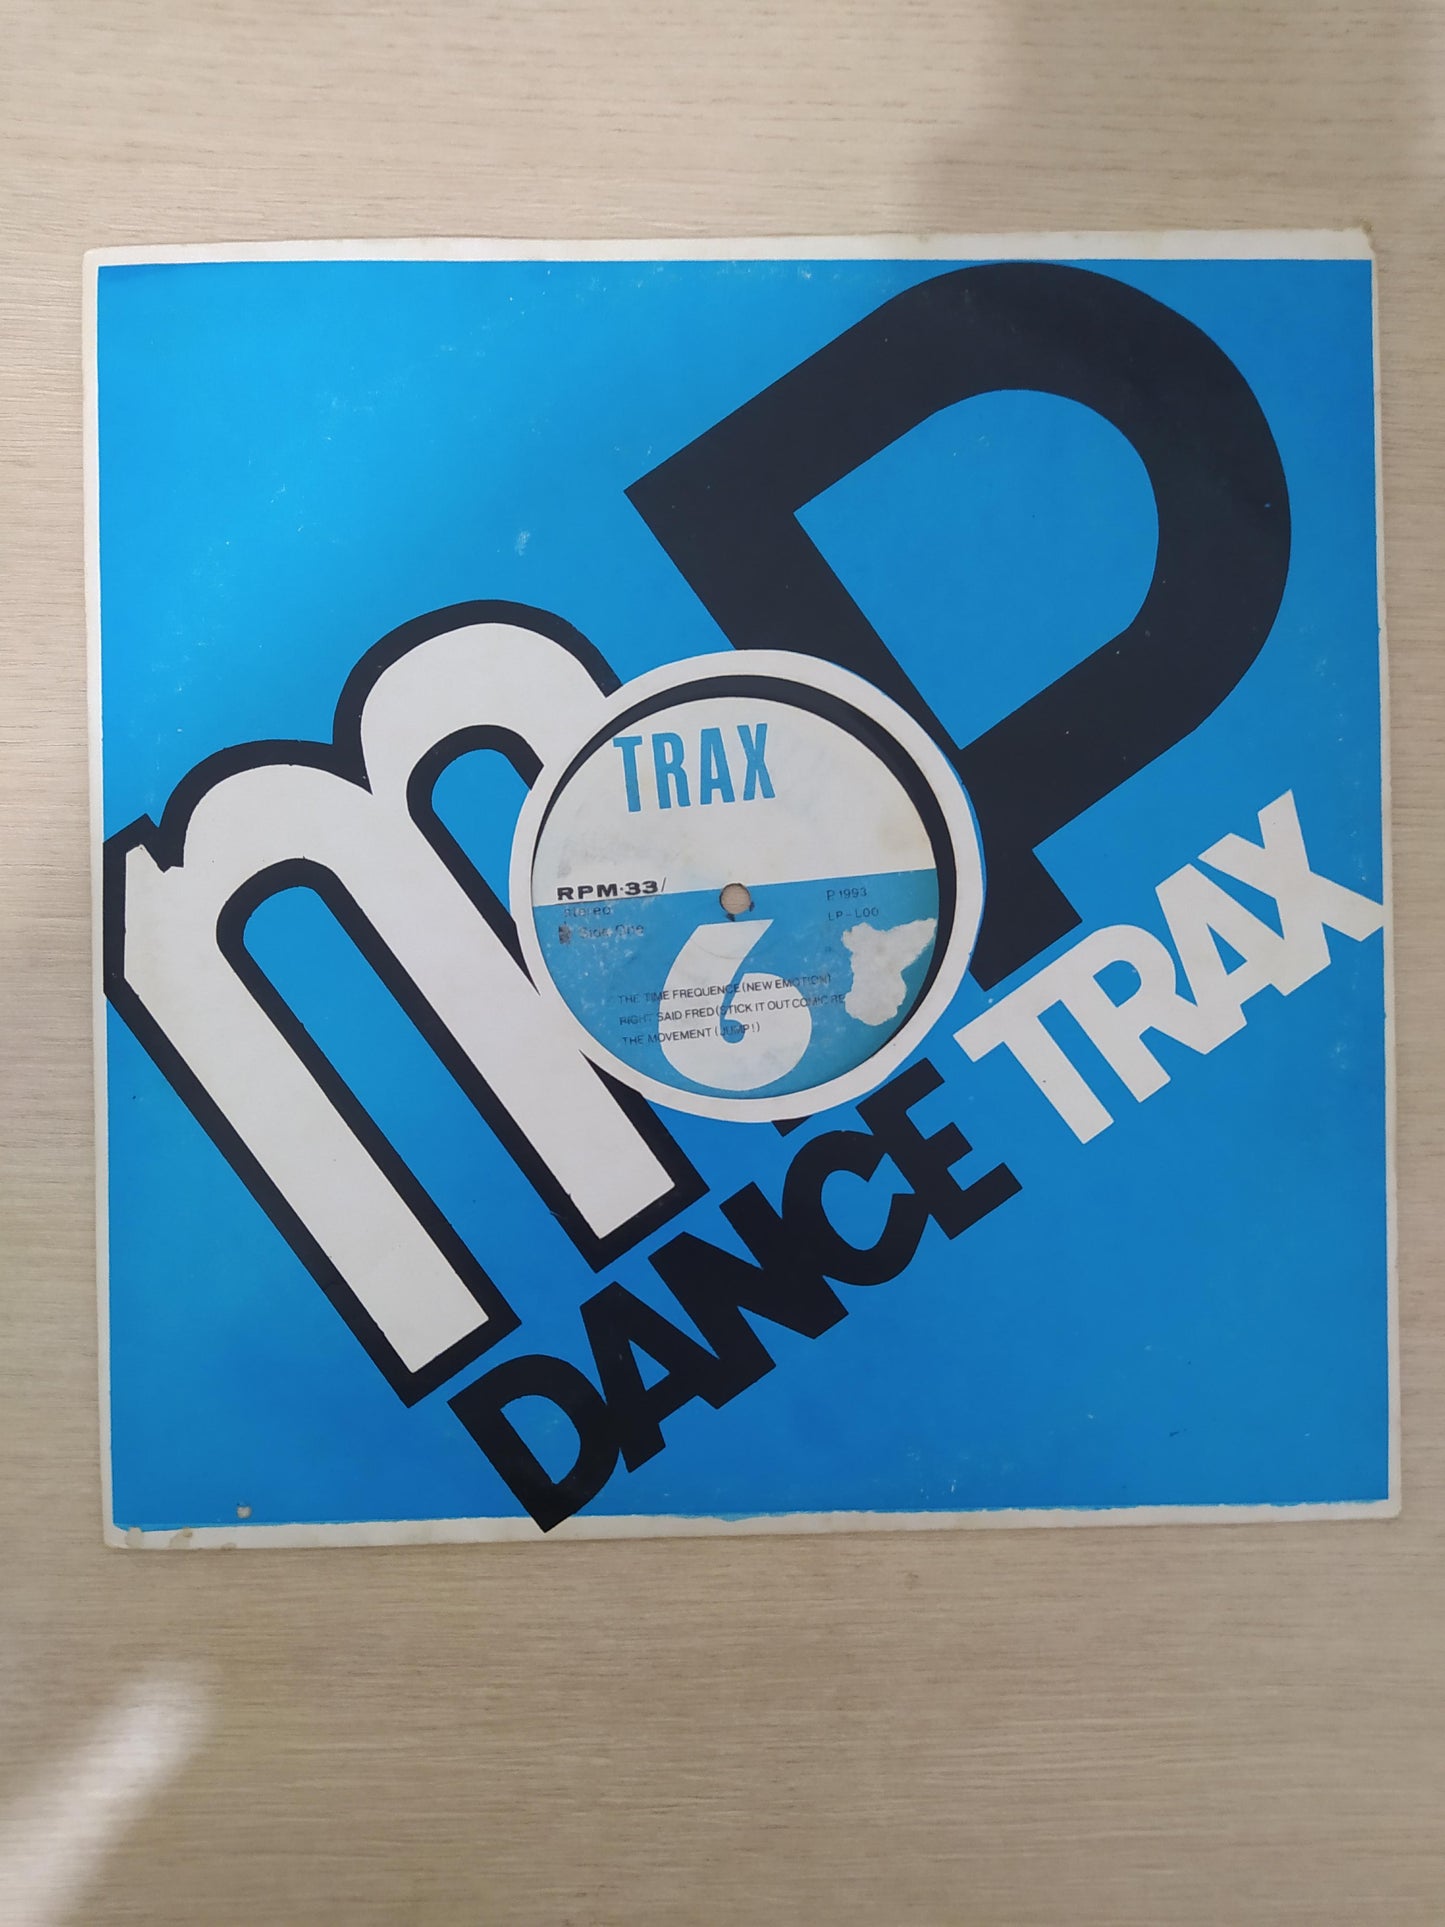 LP Vinil MP Dance Trax The Time Frequence